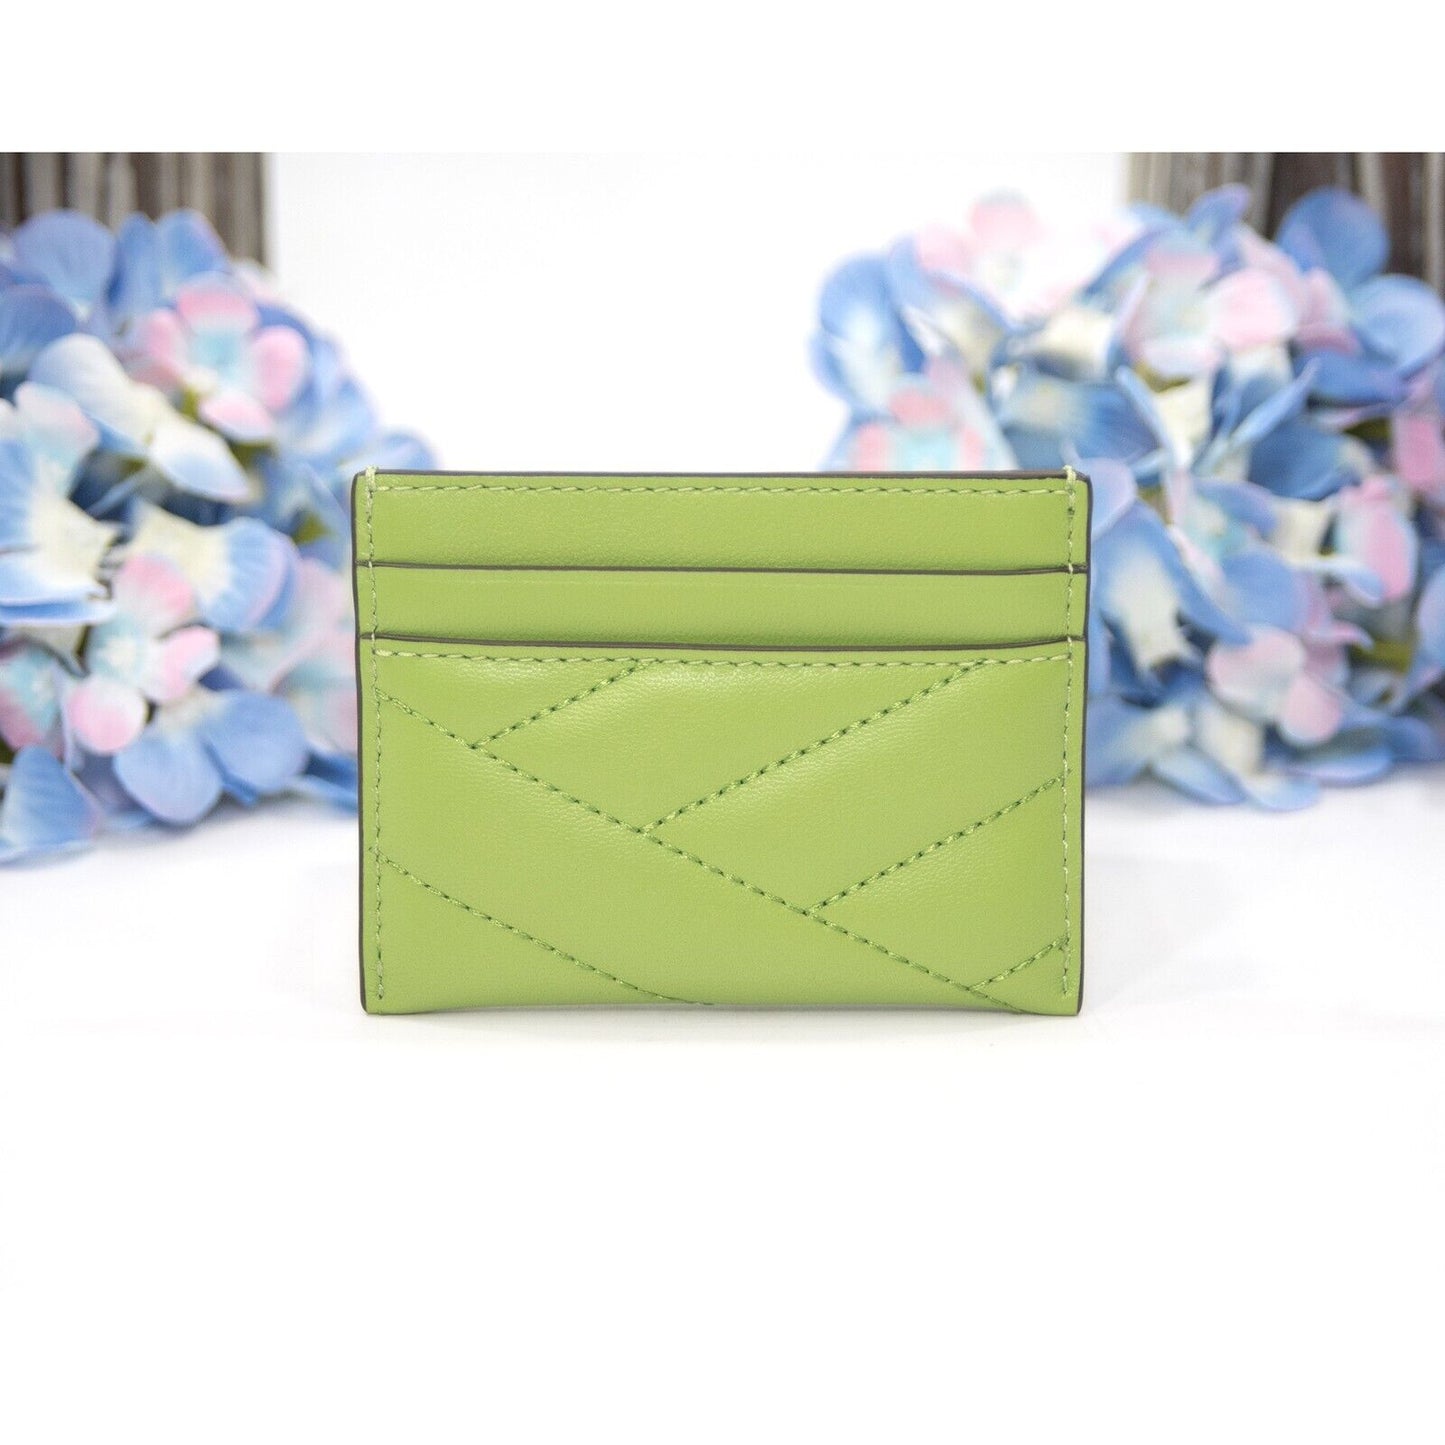 Tory Burch Wild Leaves Green Leather Kira Quilted Logo Card Case Mini Wallet NWT